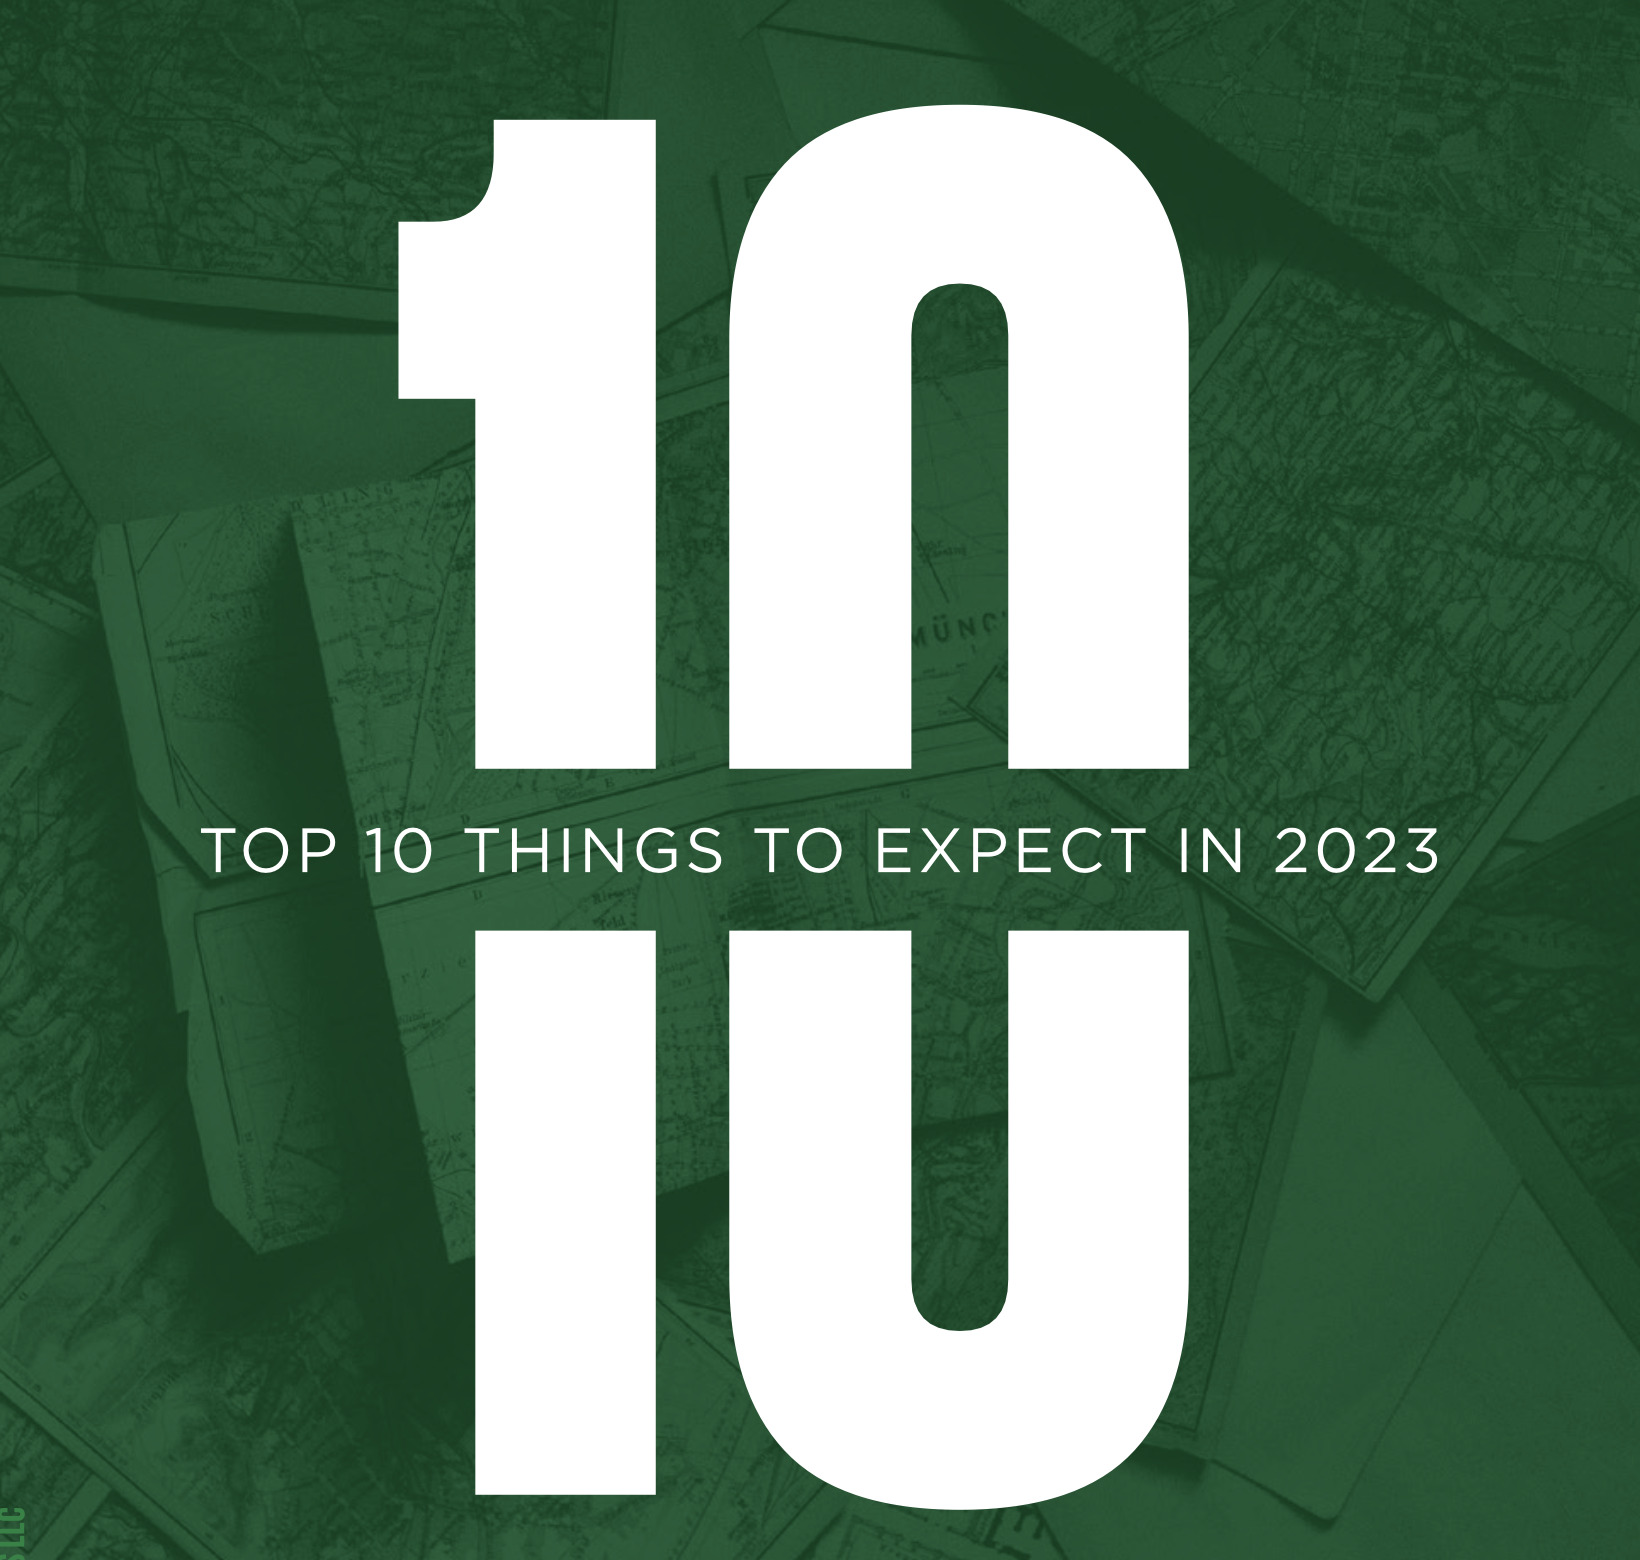 The Top 10 Things For 2023